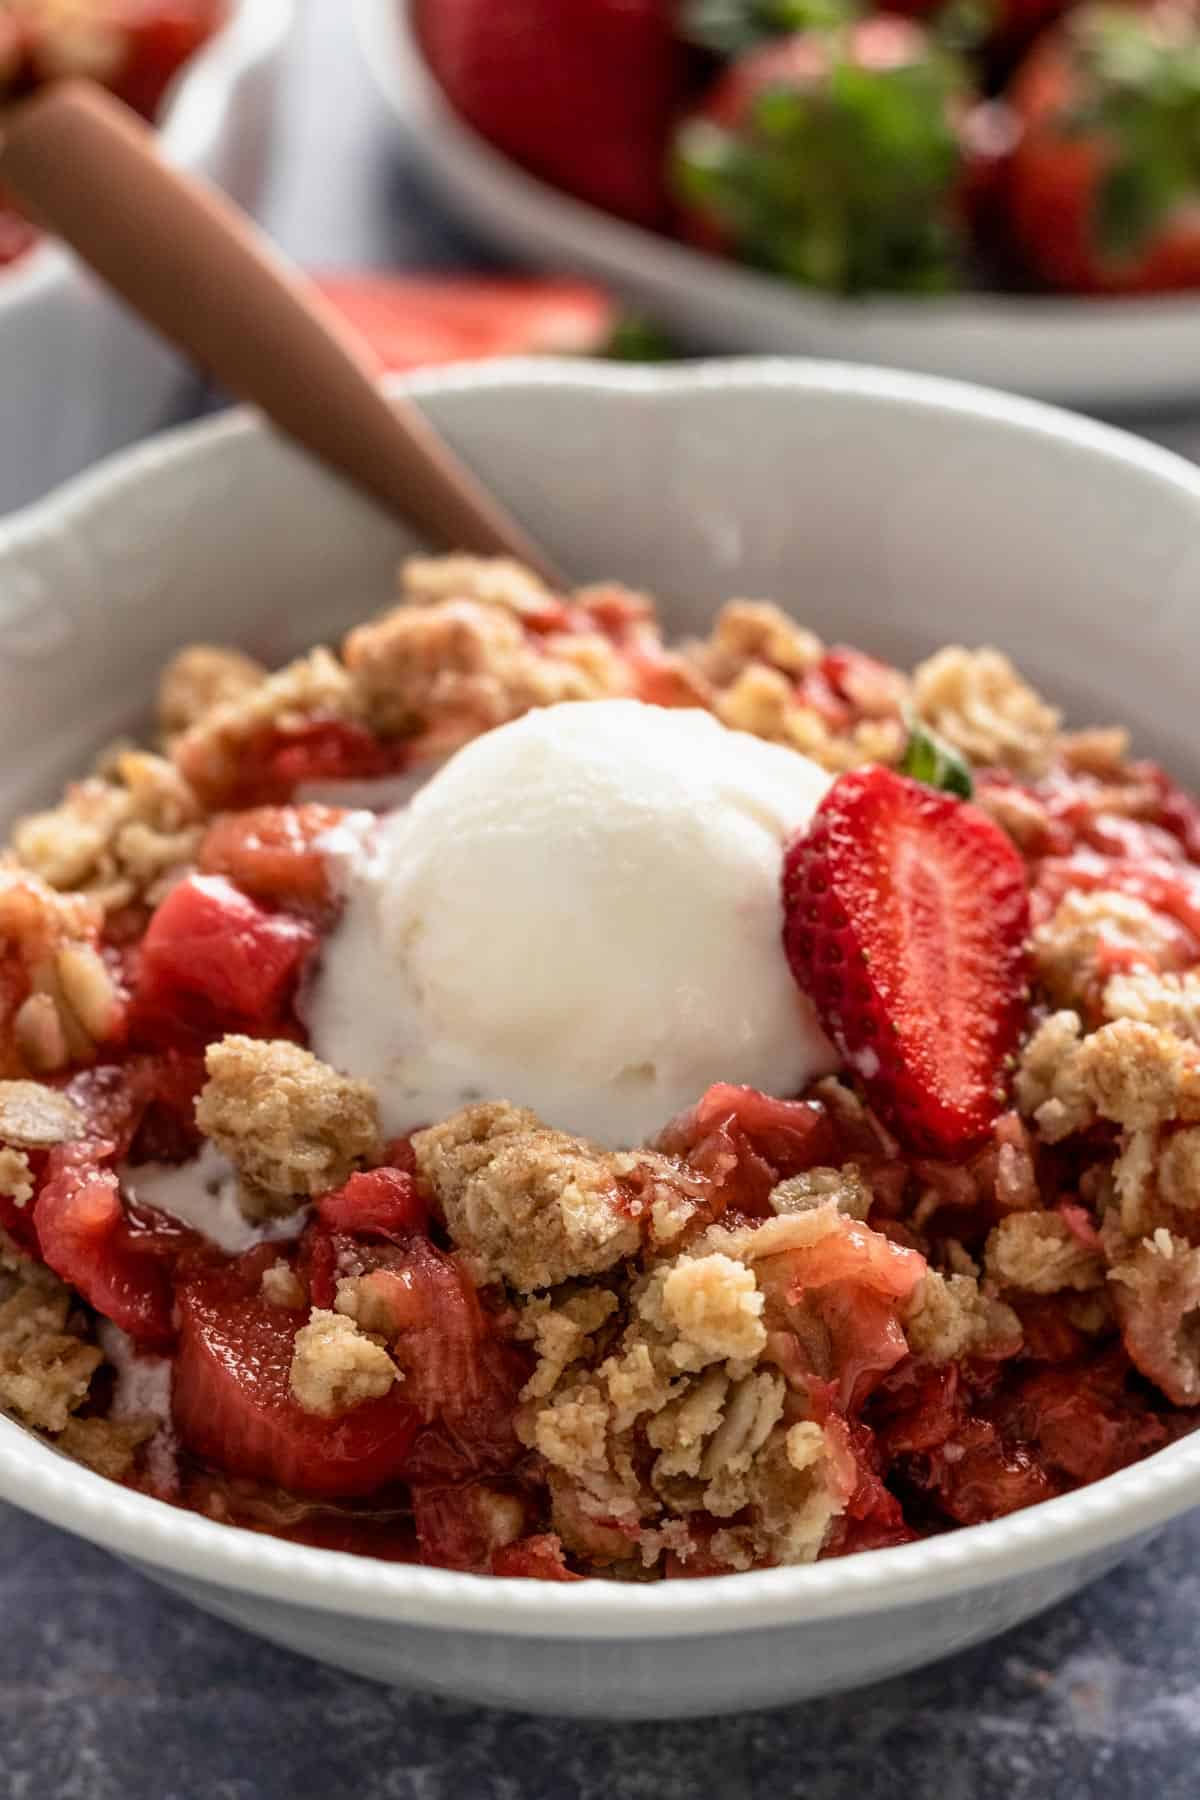 Strawberry Rhubarb Crisp in a bowl with ice cream